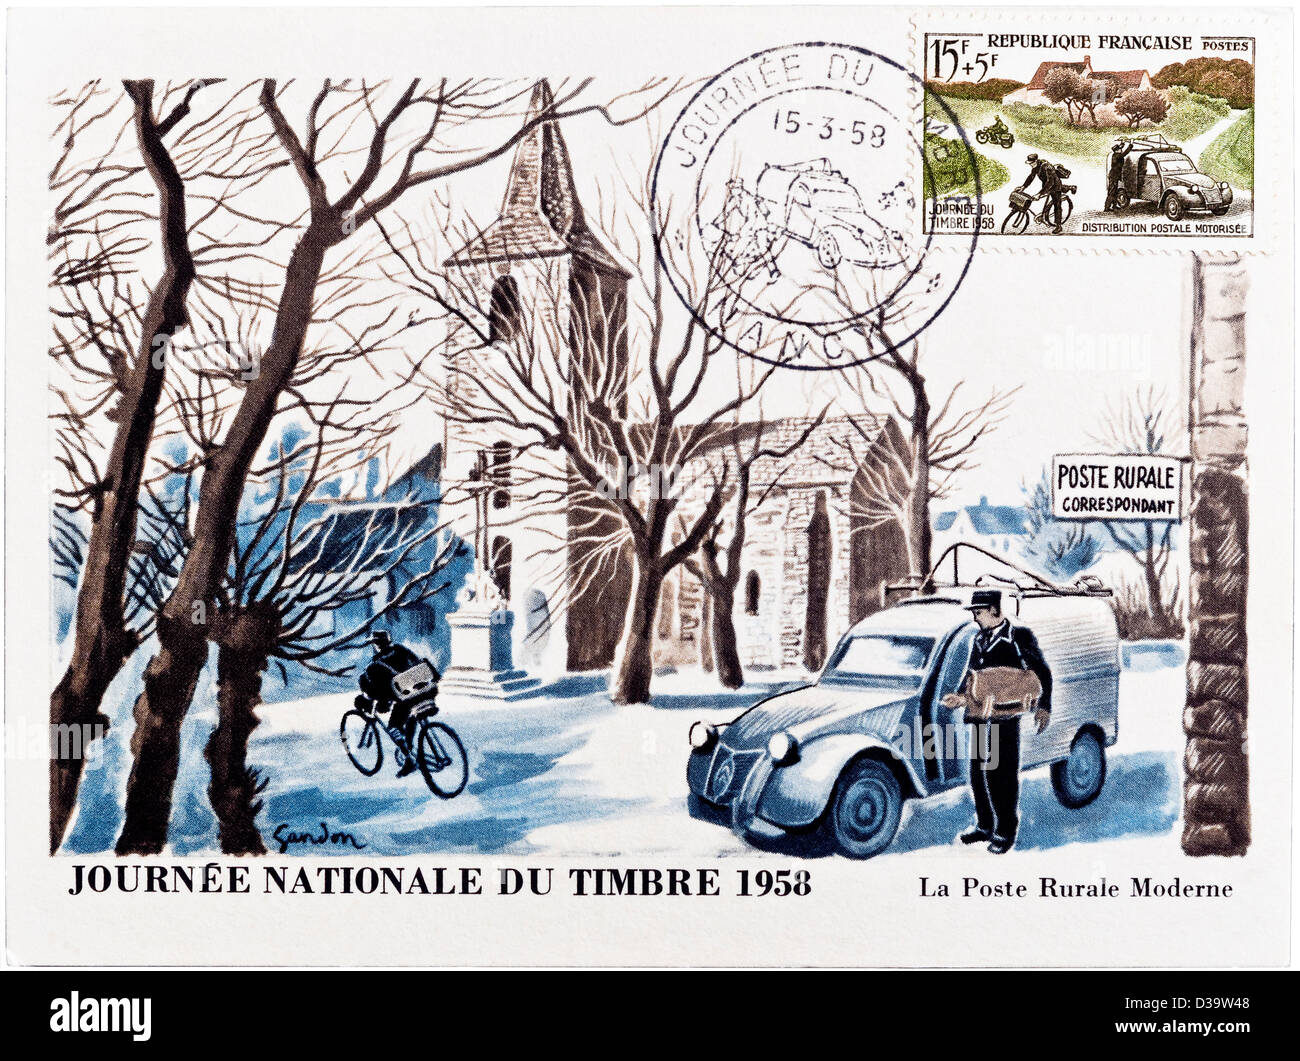 1958 French postcard 'Journée Nationale du Timbre' (National Stamp Day). Stock Photo